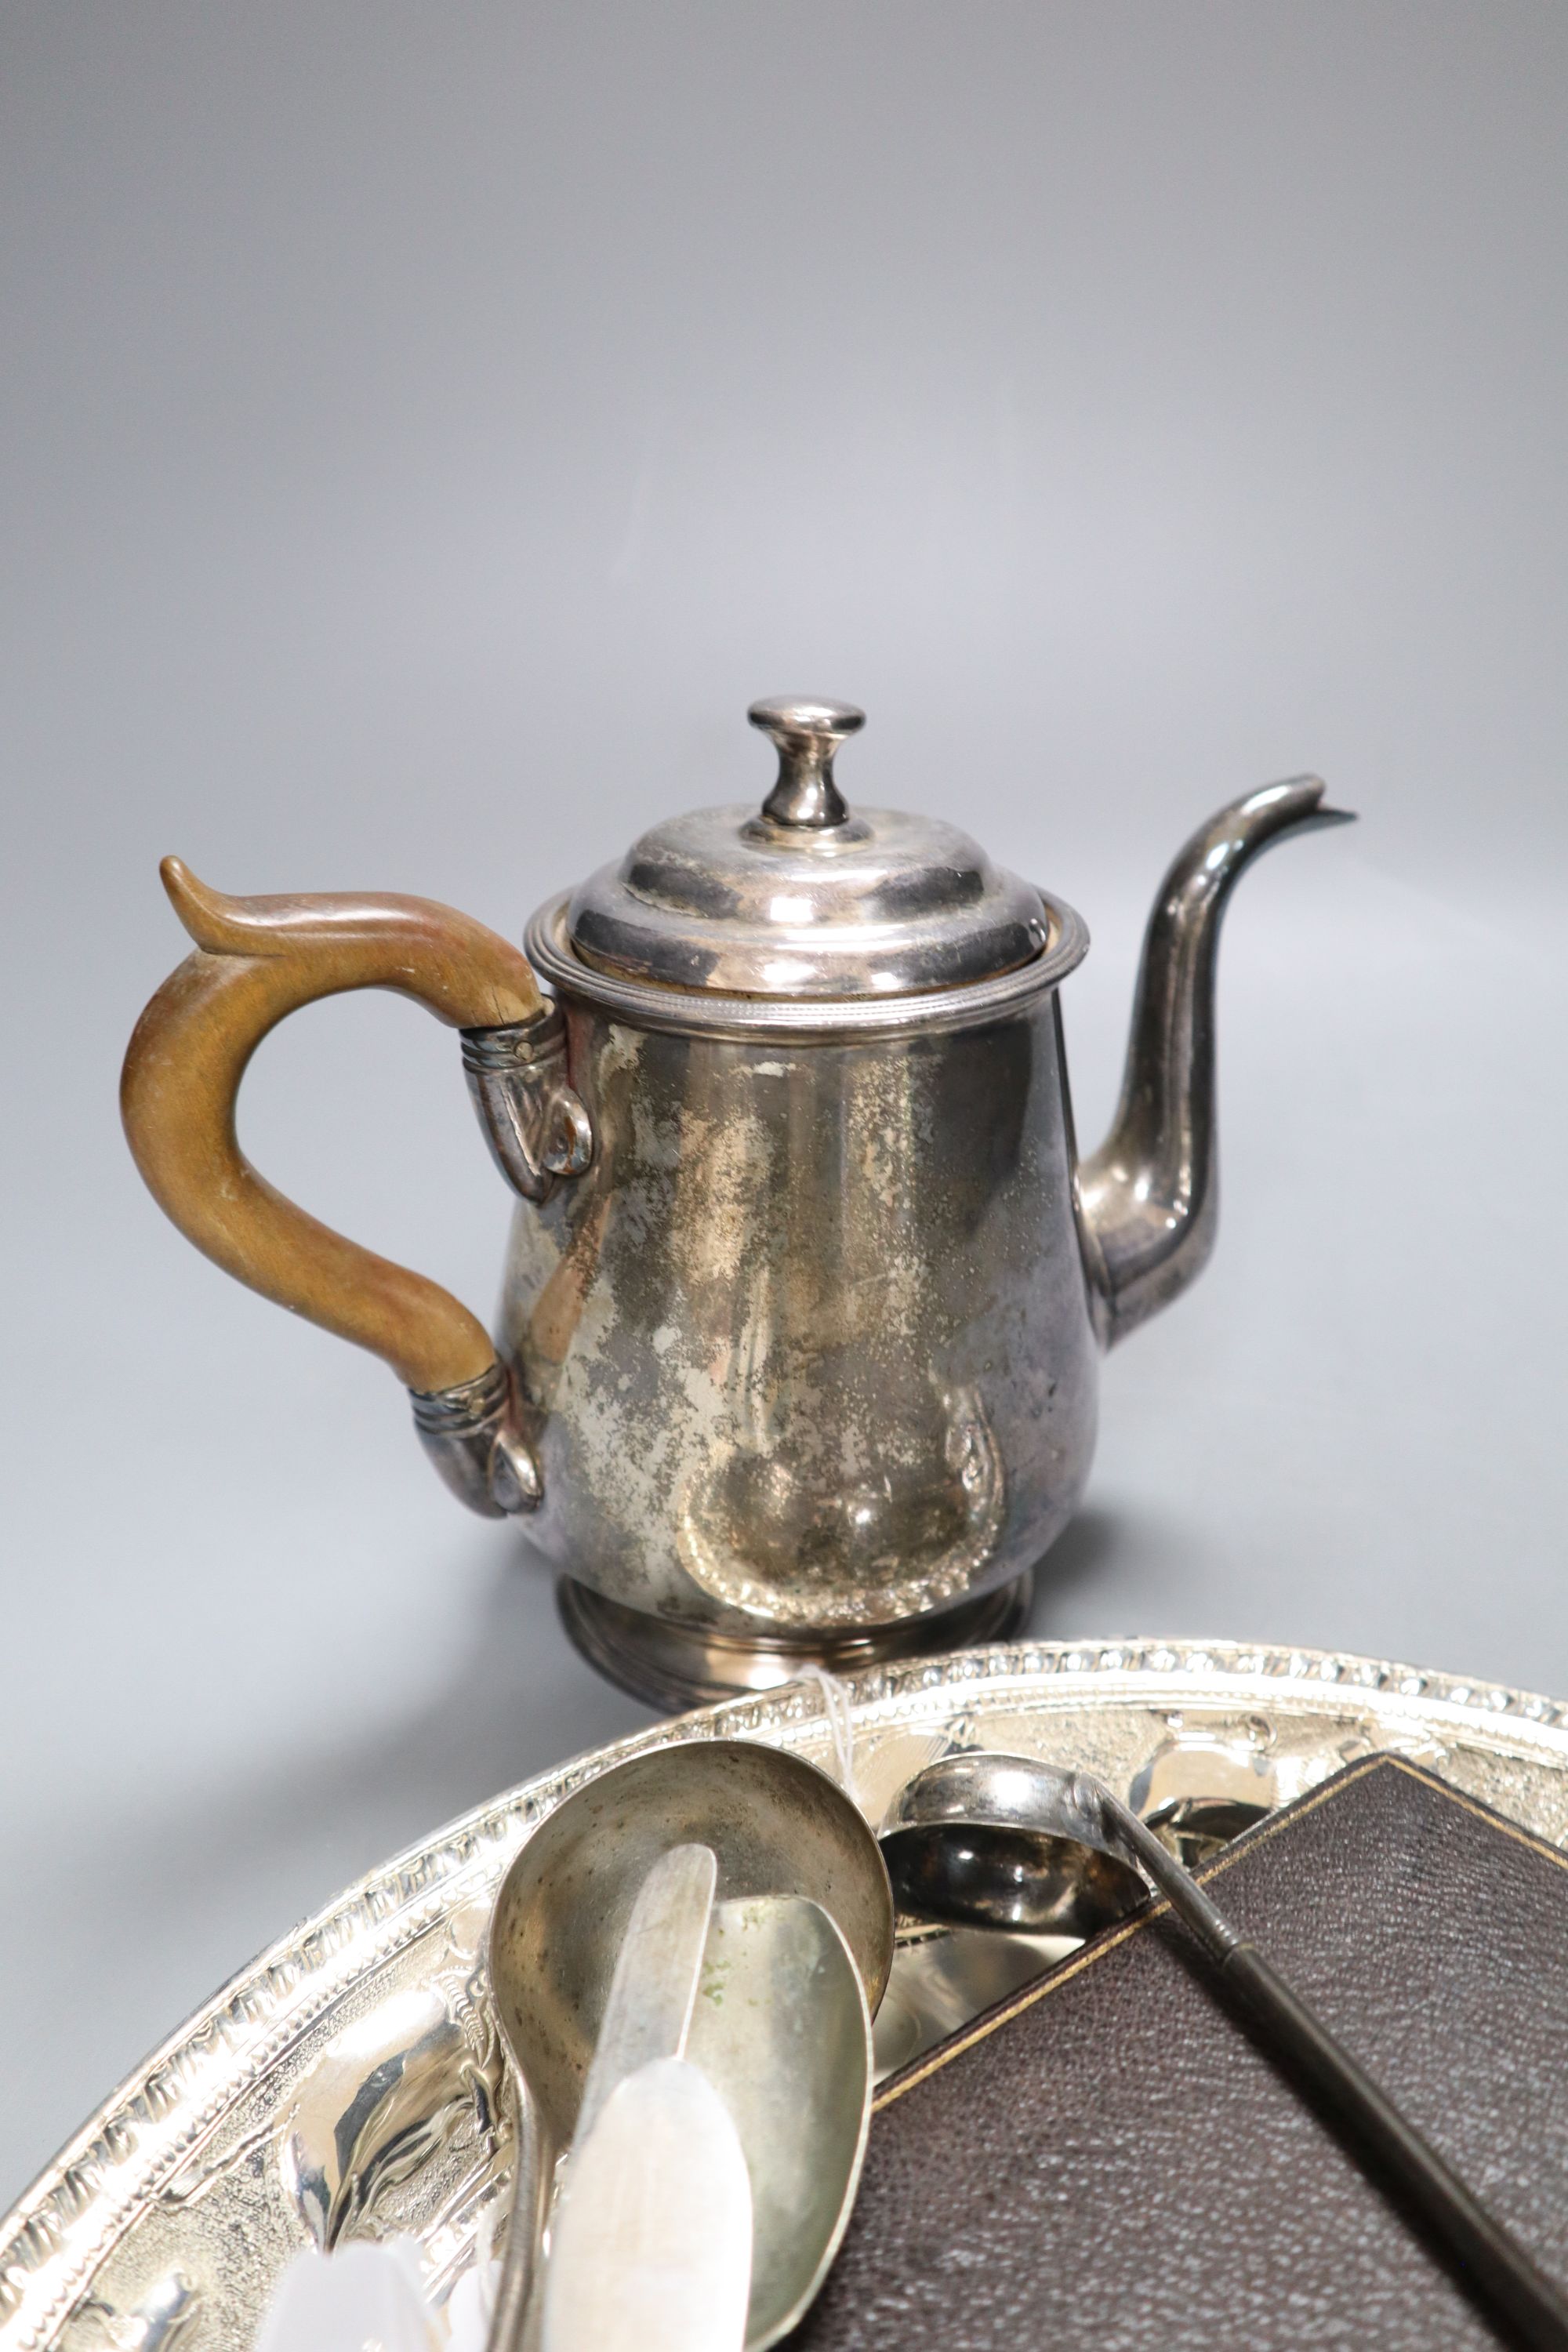 An Eastern embossed plated tray, a cased plated nut and grape set, a plated coffee pot, a silver sauce ladle and sundries